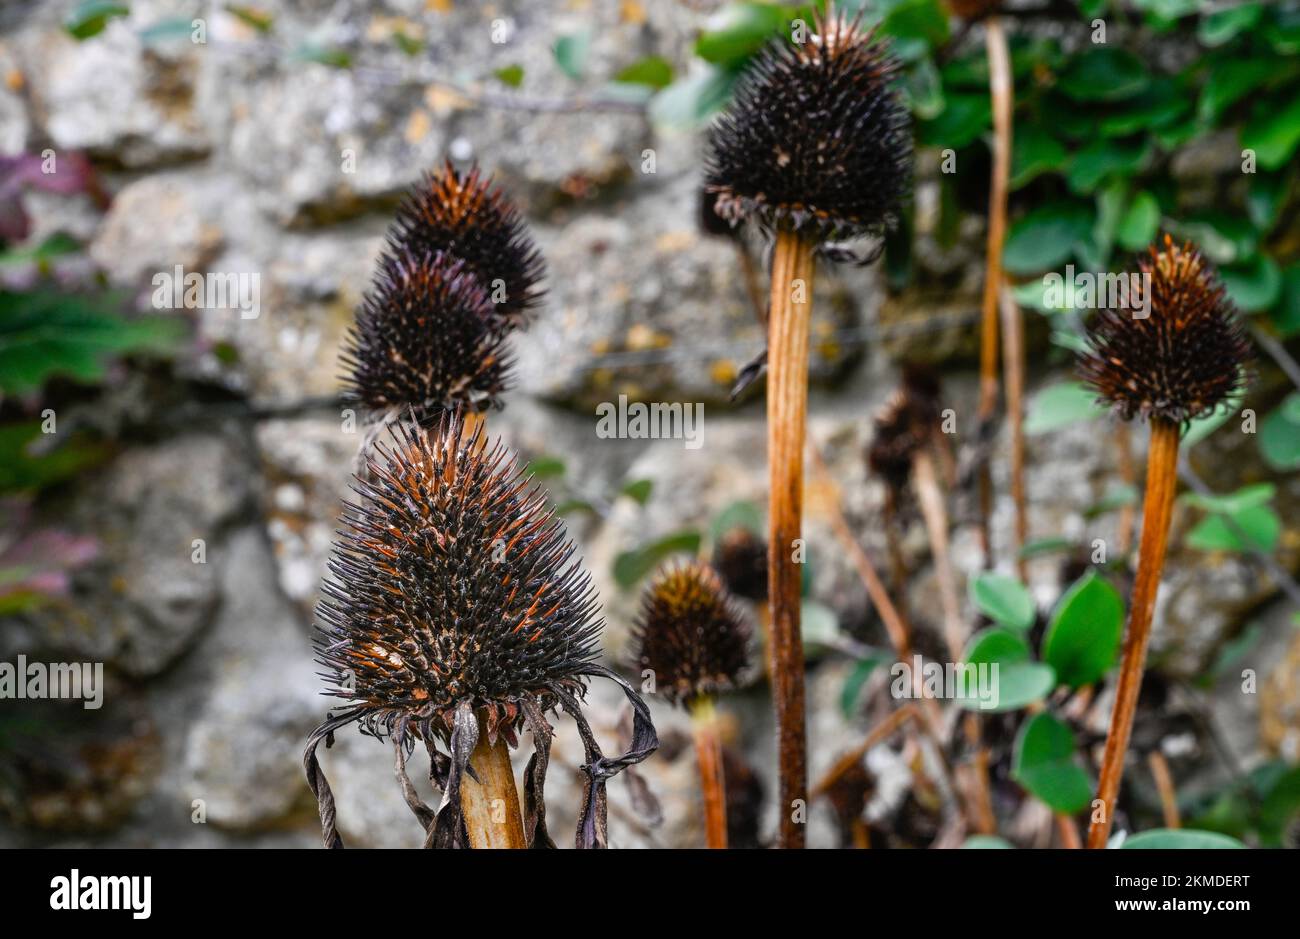 Ripe seed heads of Echinacea Purpura, Purple Coneflower showing the spikey seeds ready to be dispersed Stock Photo